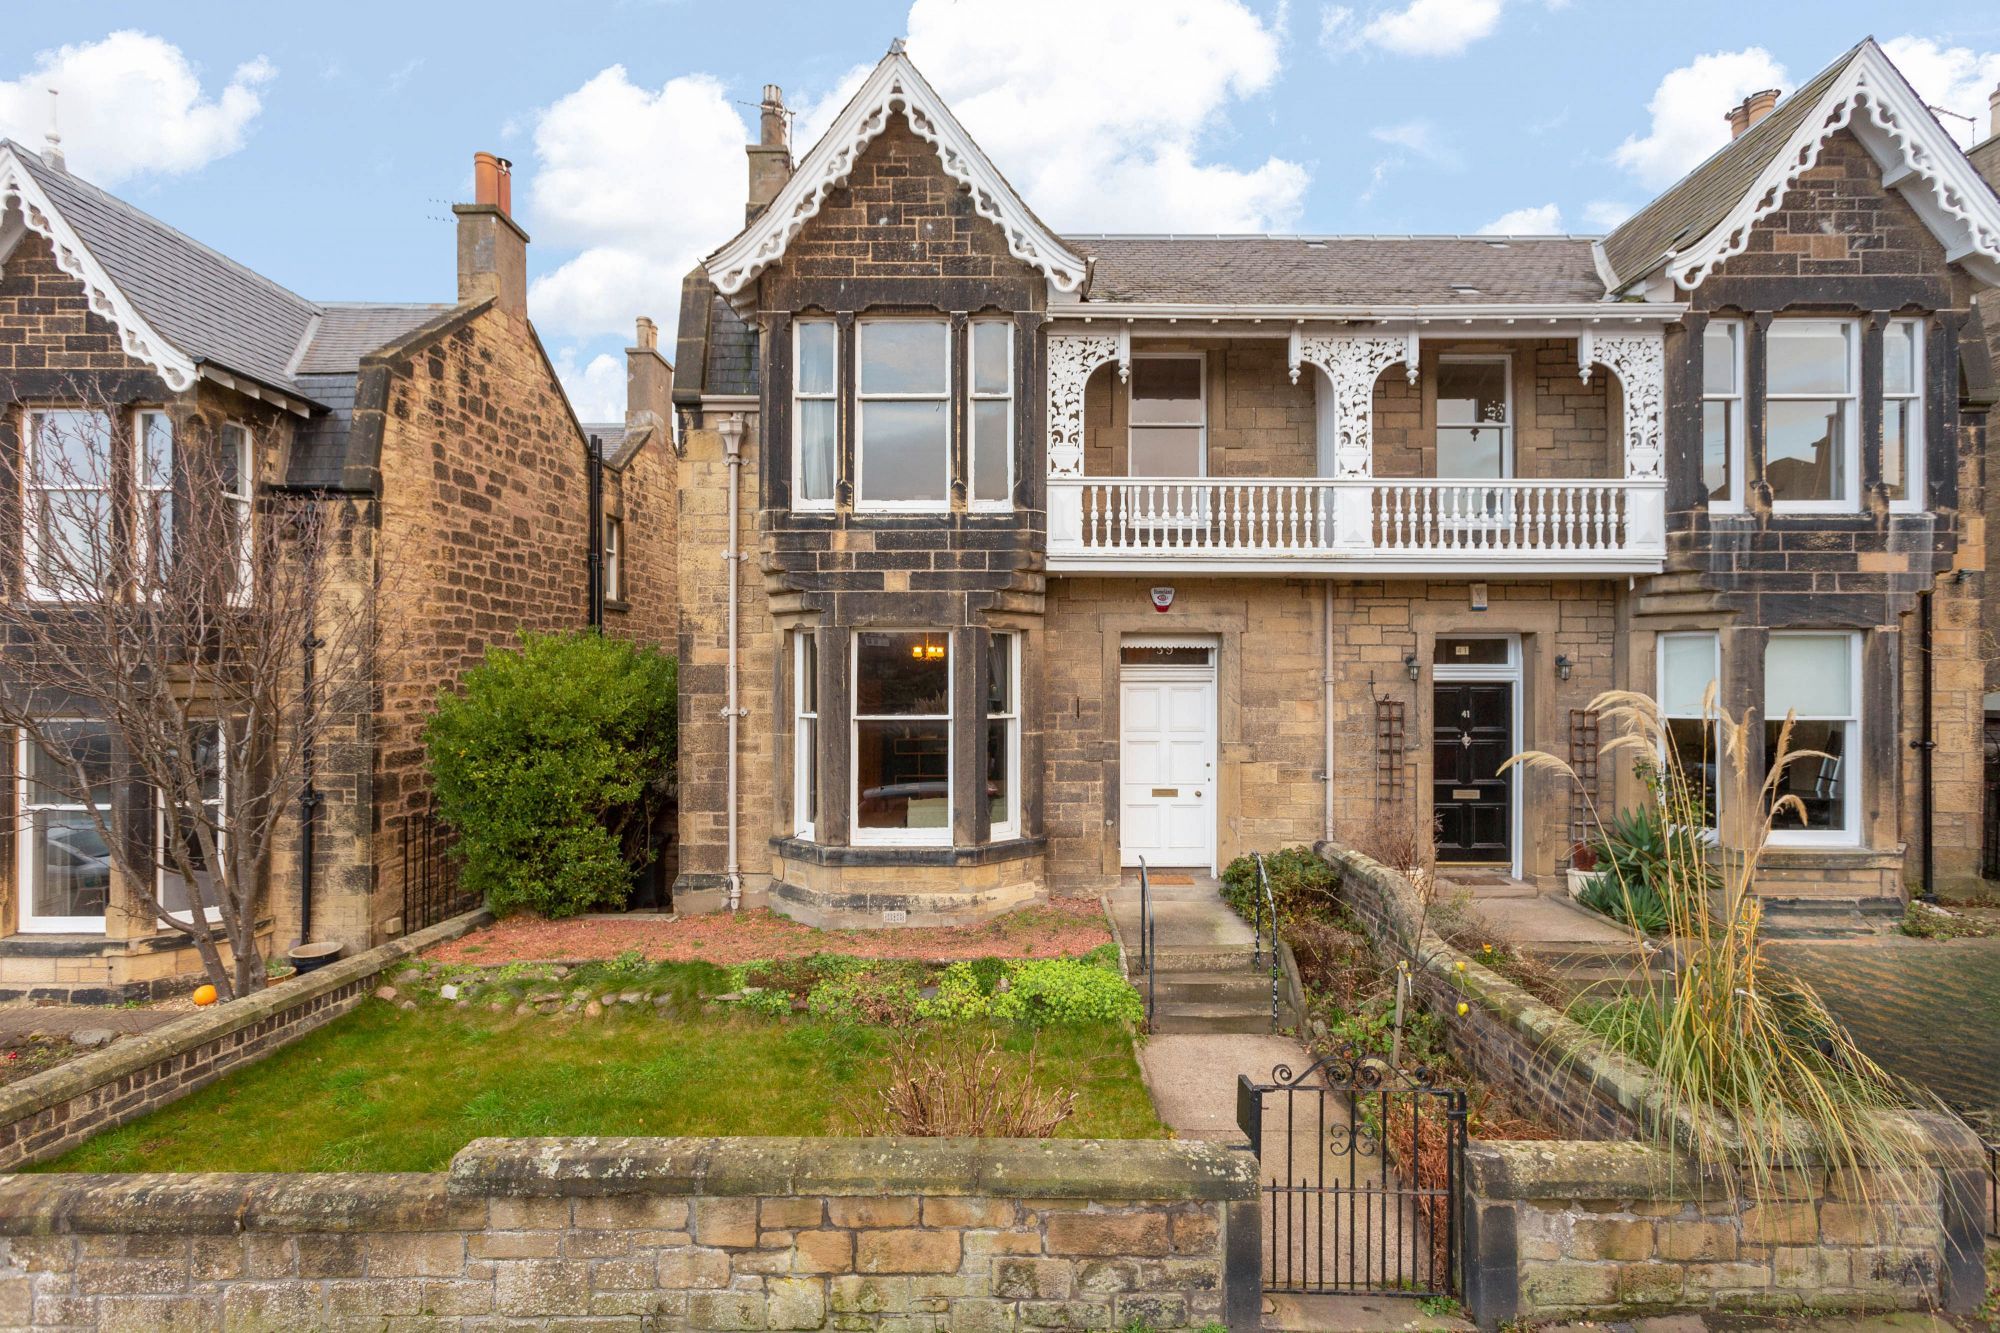 edinburgh for sale: the top 10 most viewed properties in january on the espc website